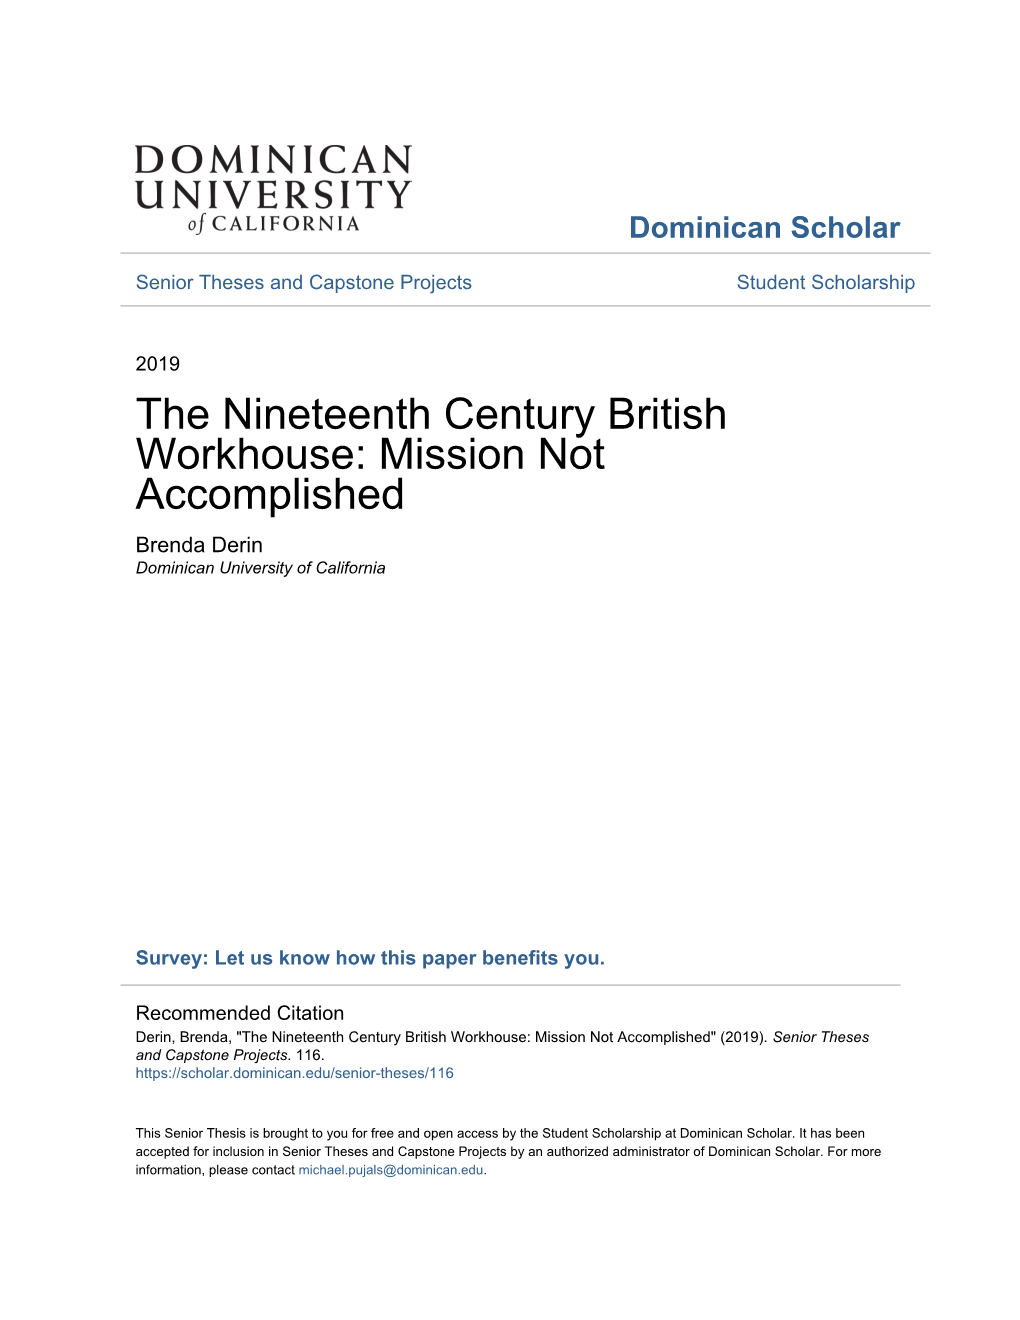 The Nineteenth Century British Workhouse: Mission Not Accomplished Brenda Derin Dominican University of California